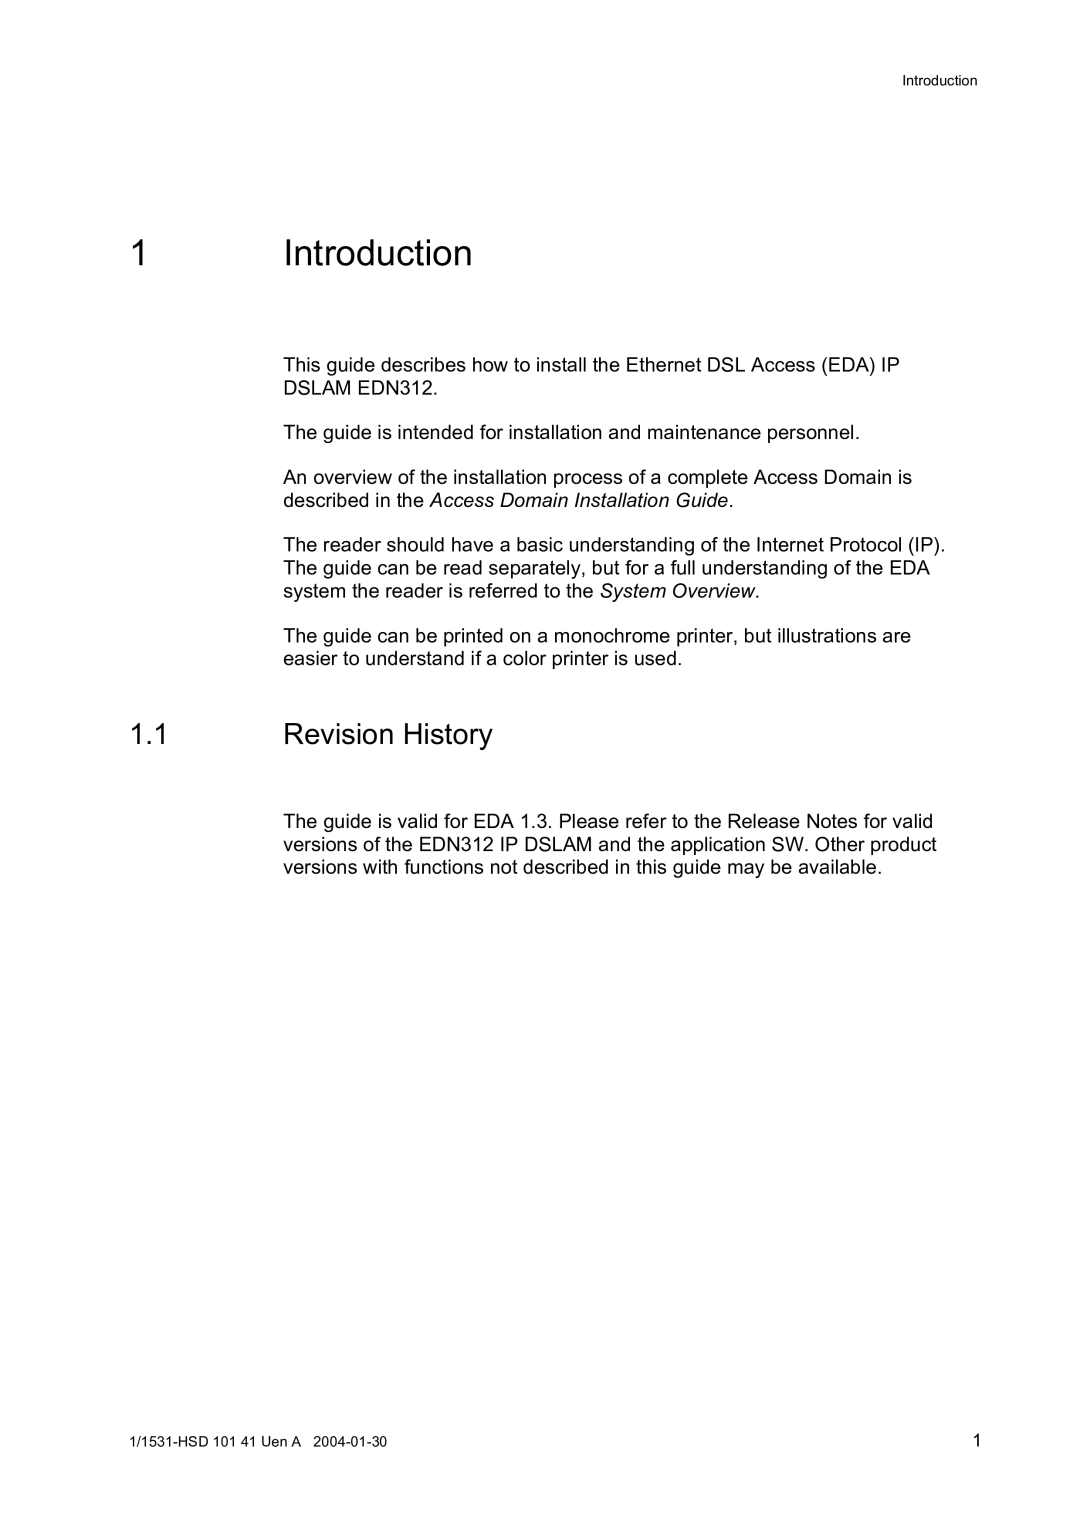 Ericsson EDN312, IP DSLAM manual Introduction, Revision History 